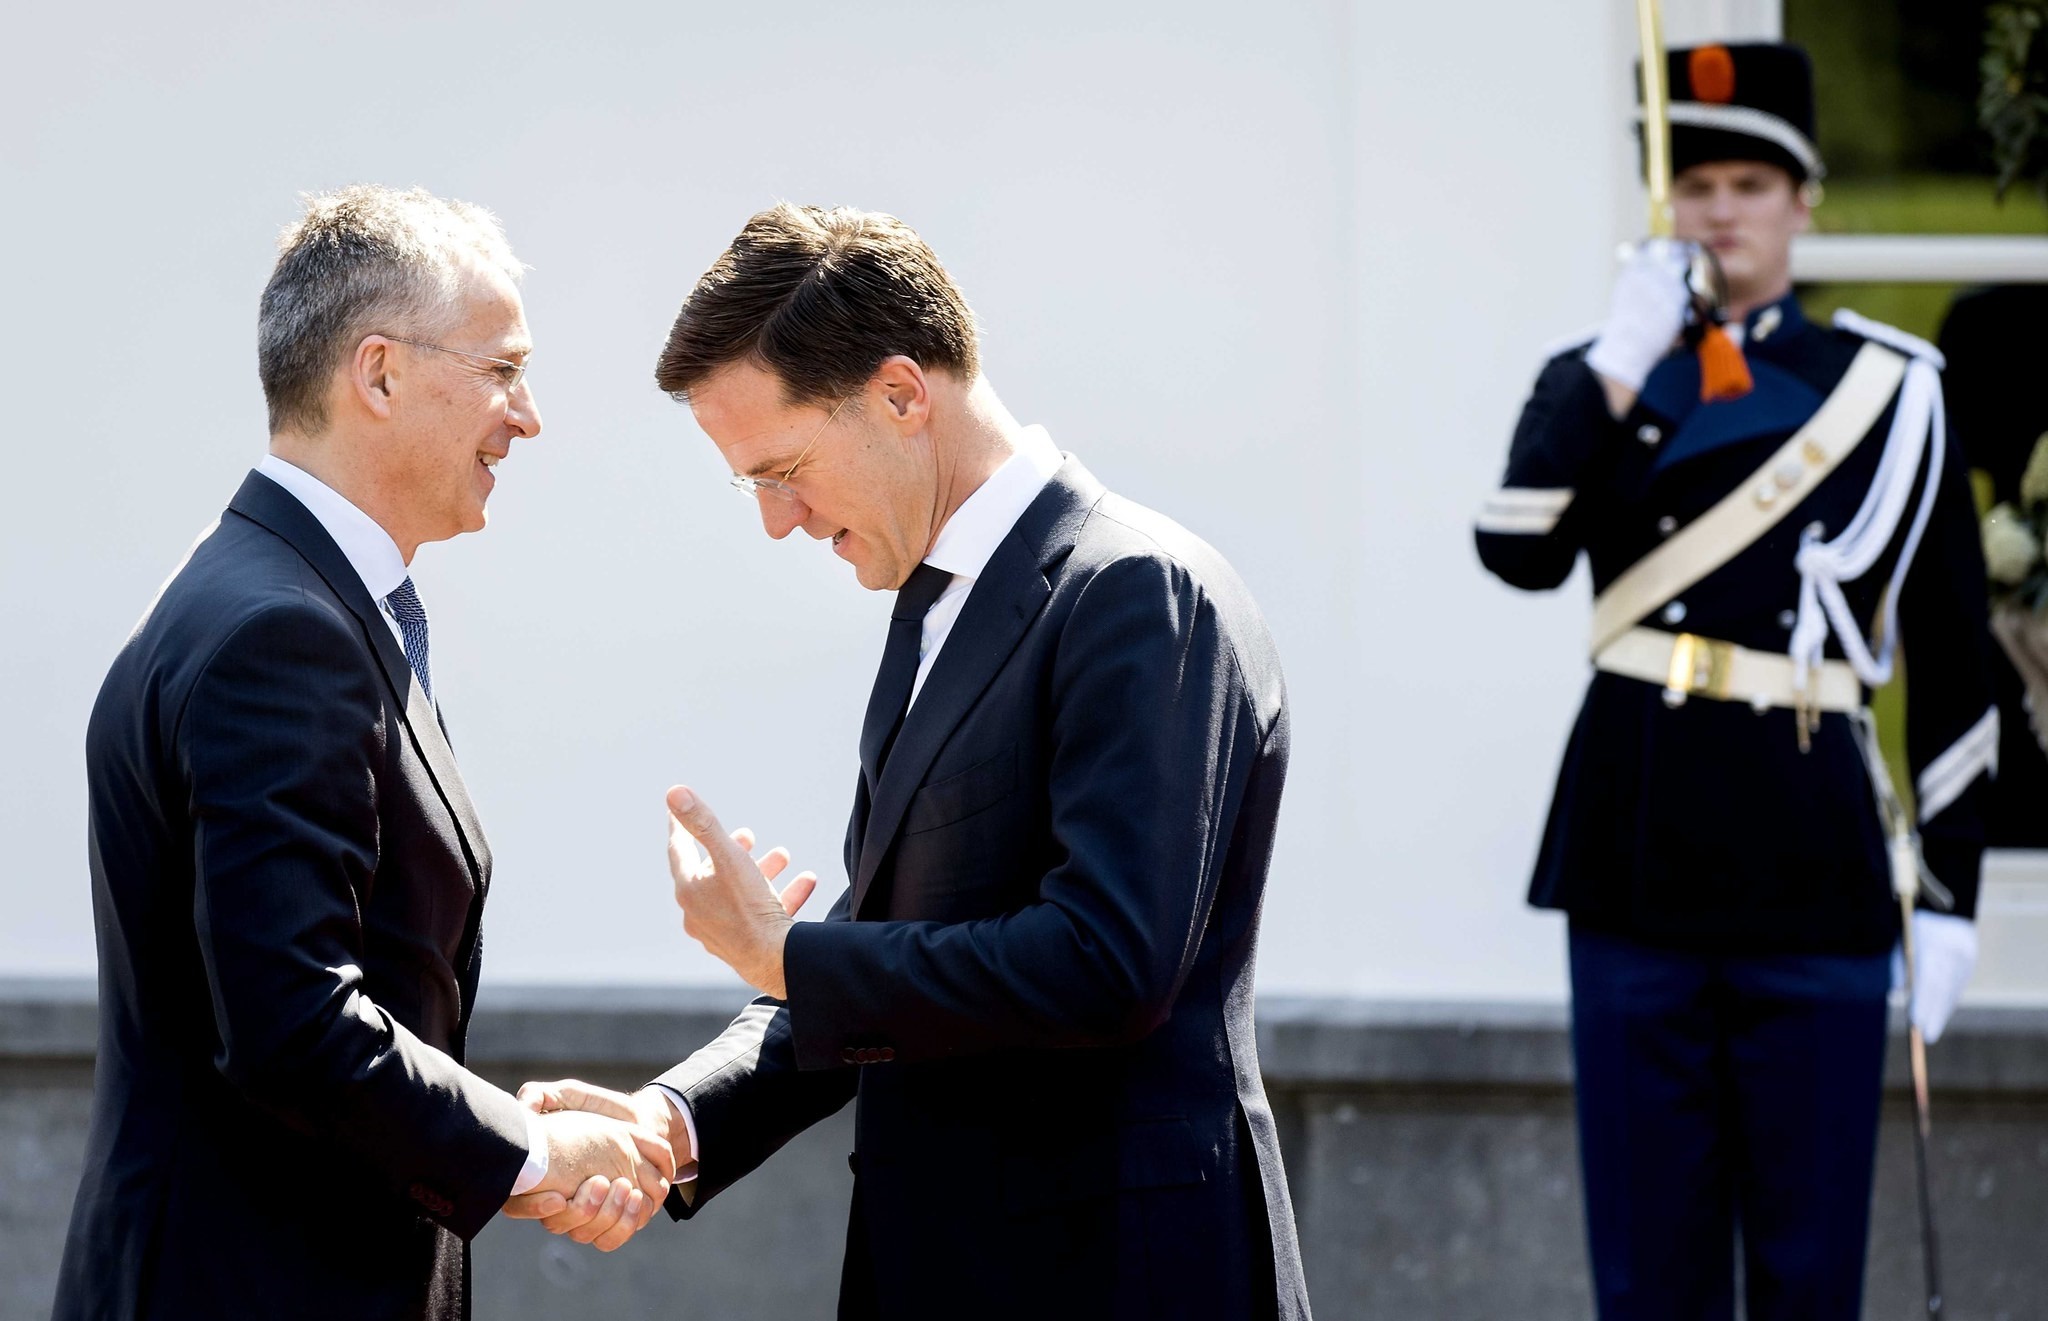 Dutch Prime Minister Mark Rutte (C) receives NATO Secretary General Jens Stoltenberg (L) for a worklunch at the Catshuis in The Hague, The Netherlands, 19 April 2018. (EPA Photo)